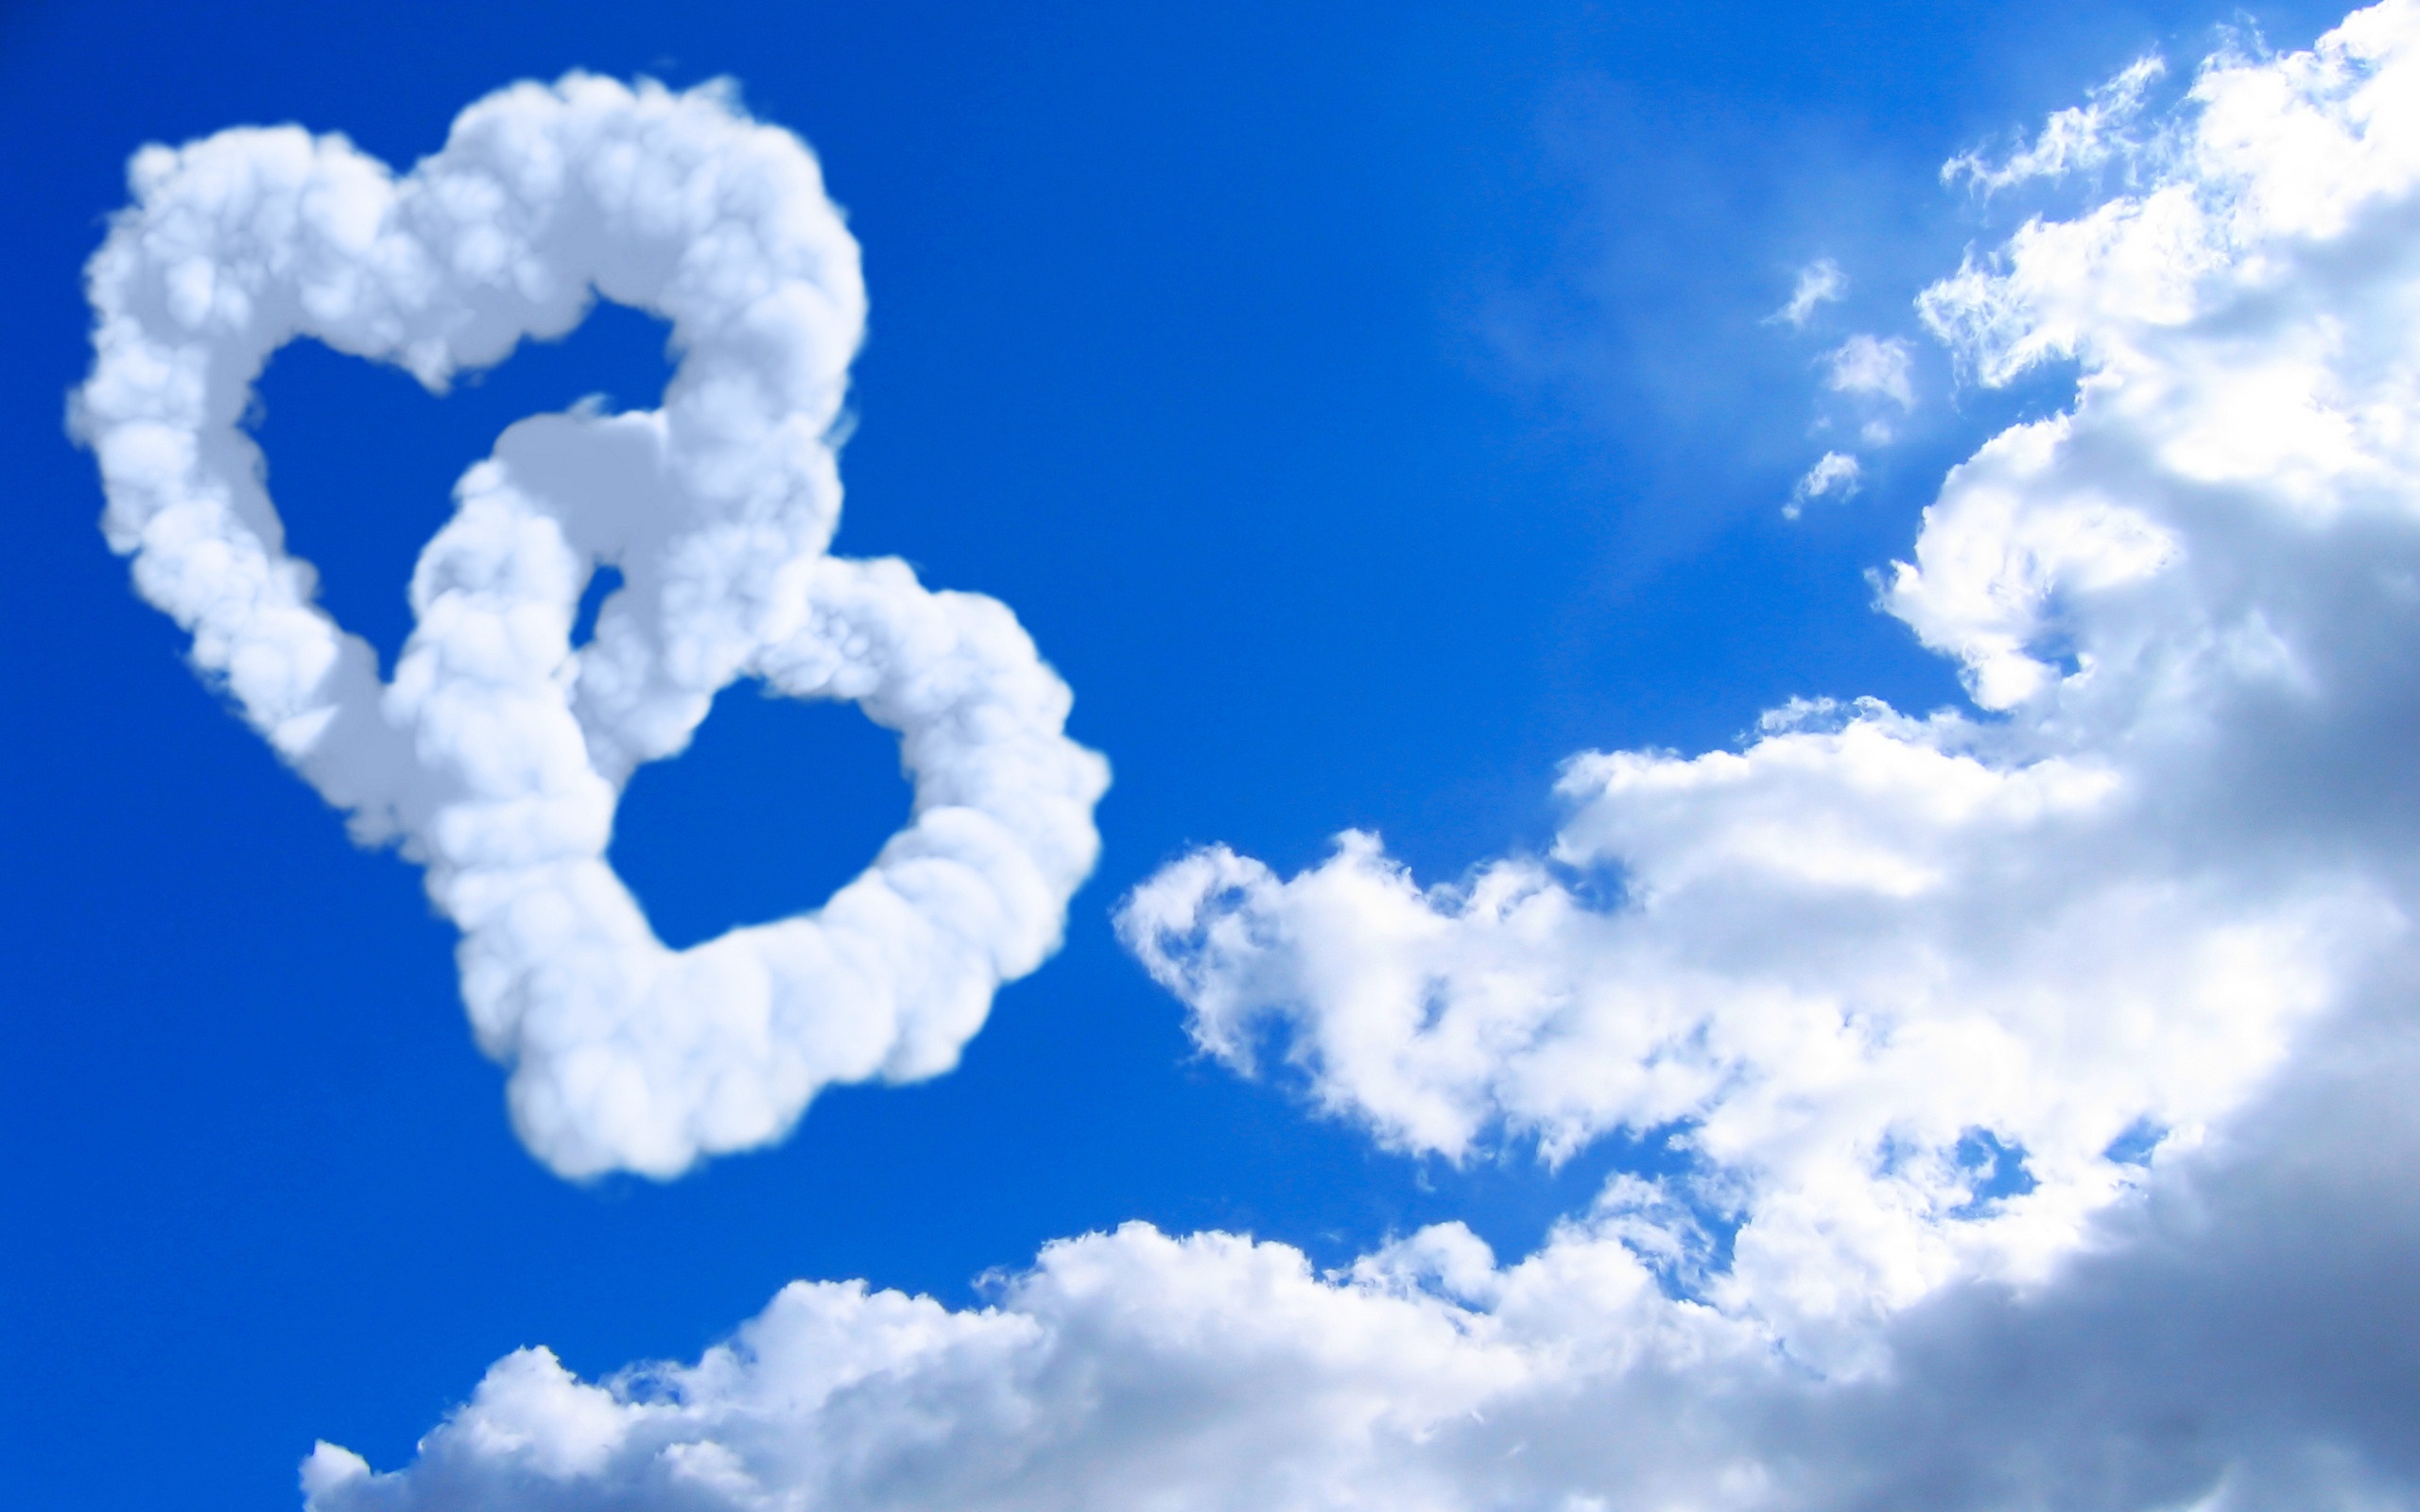 Hearts in Clouds HD Wallpaper Hearts in Clouds Wallpapers for Desktop 2560x1600